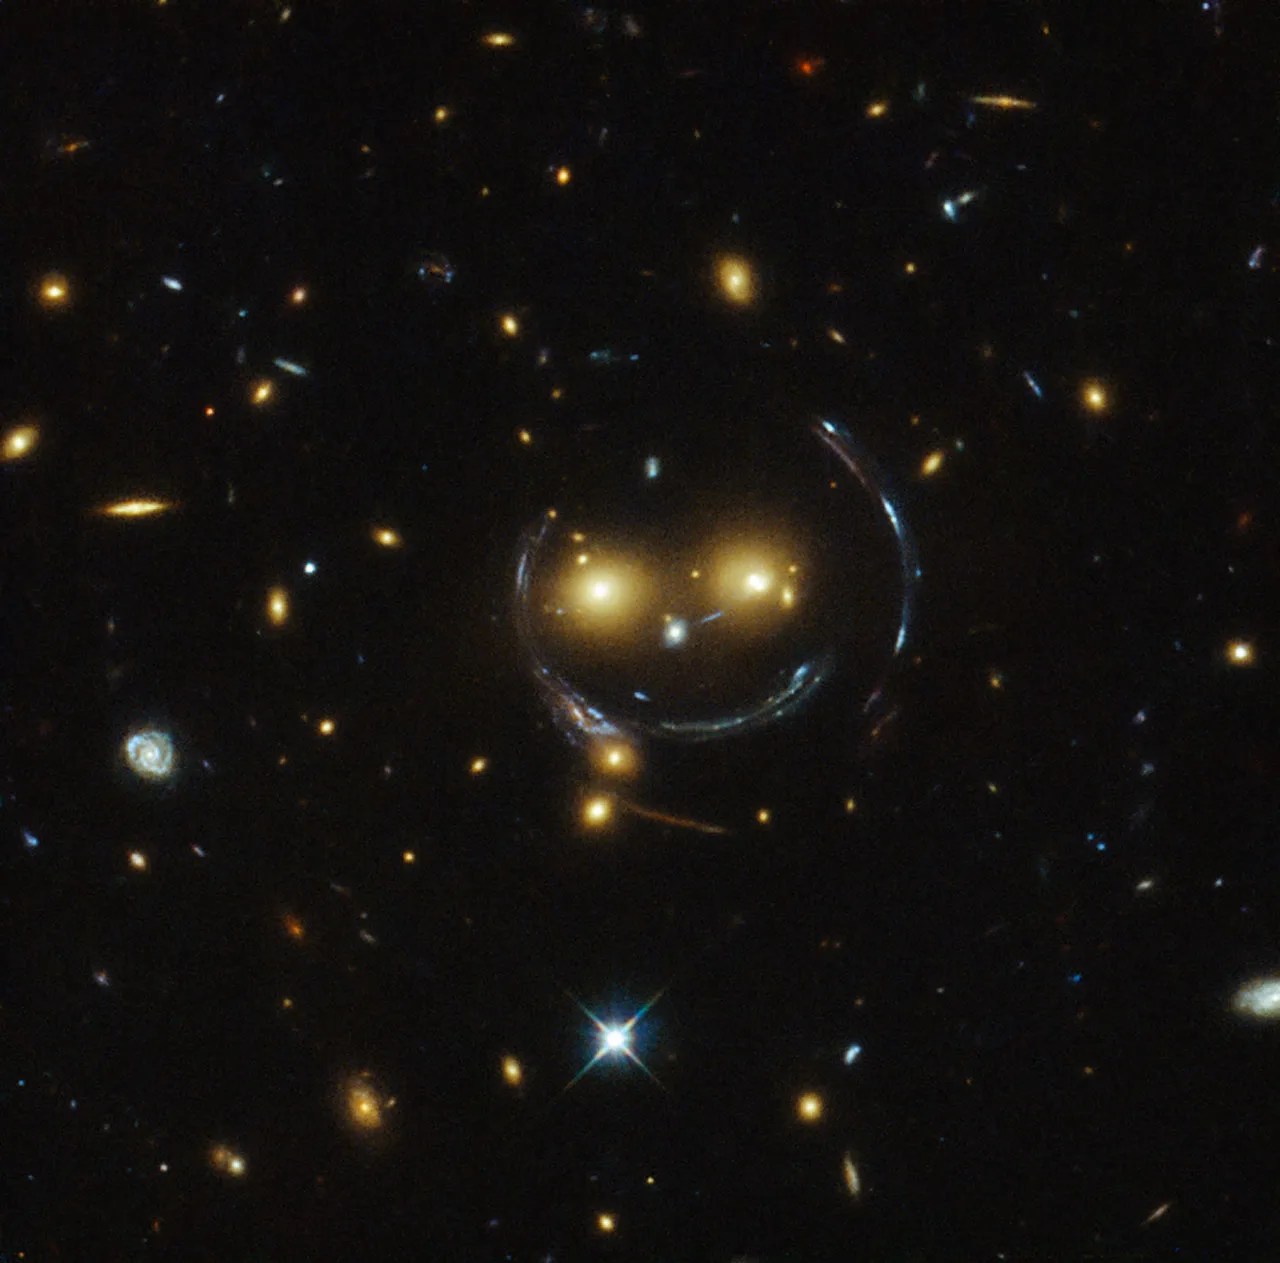 Two bright orange galaxies seem to form eyes, and streaks of curved, bent and magnified light form the circle of a face and a happy smile. A smaller bright galaxy serves as the nose in this smiley face. Other galaxies dot the picture.